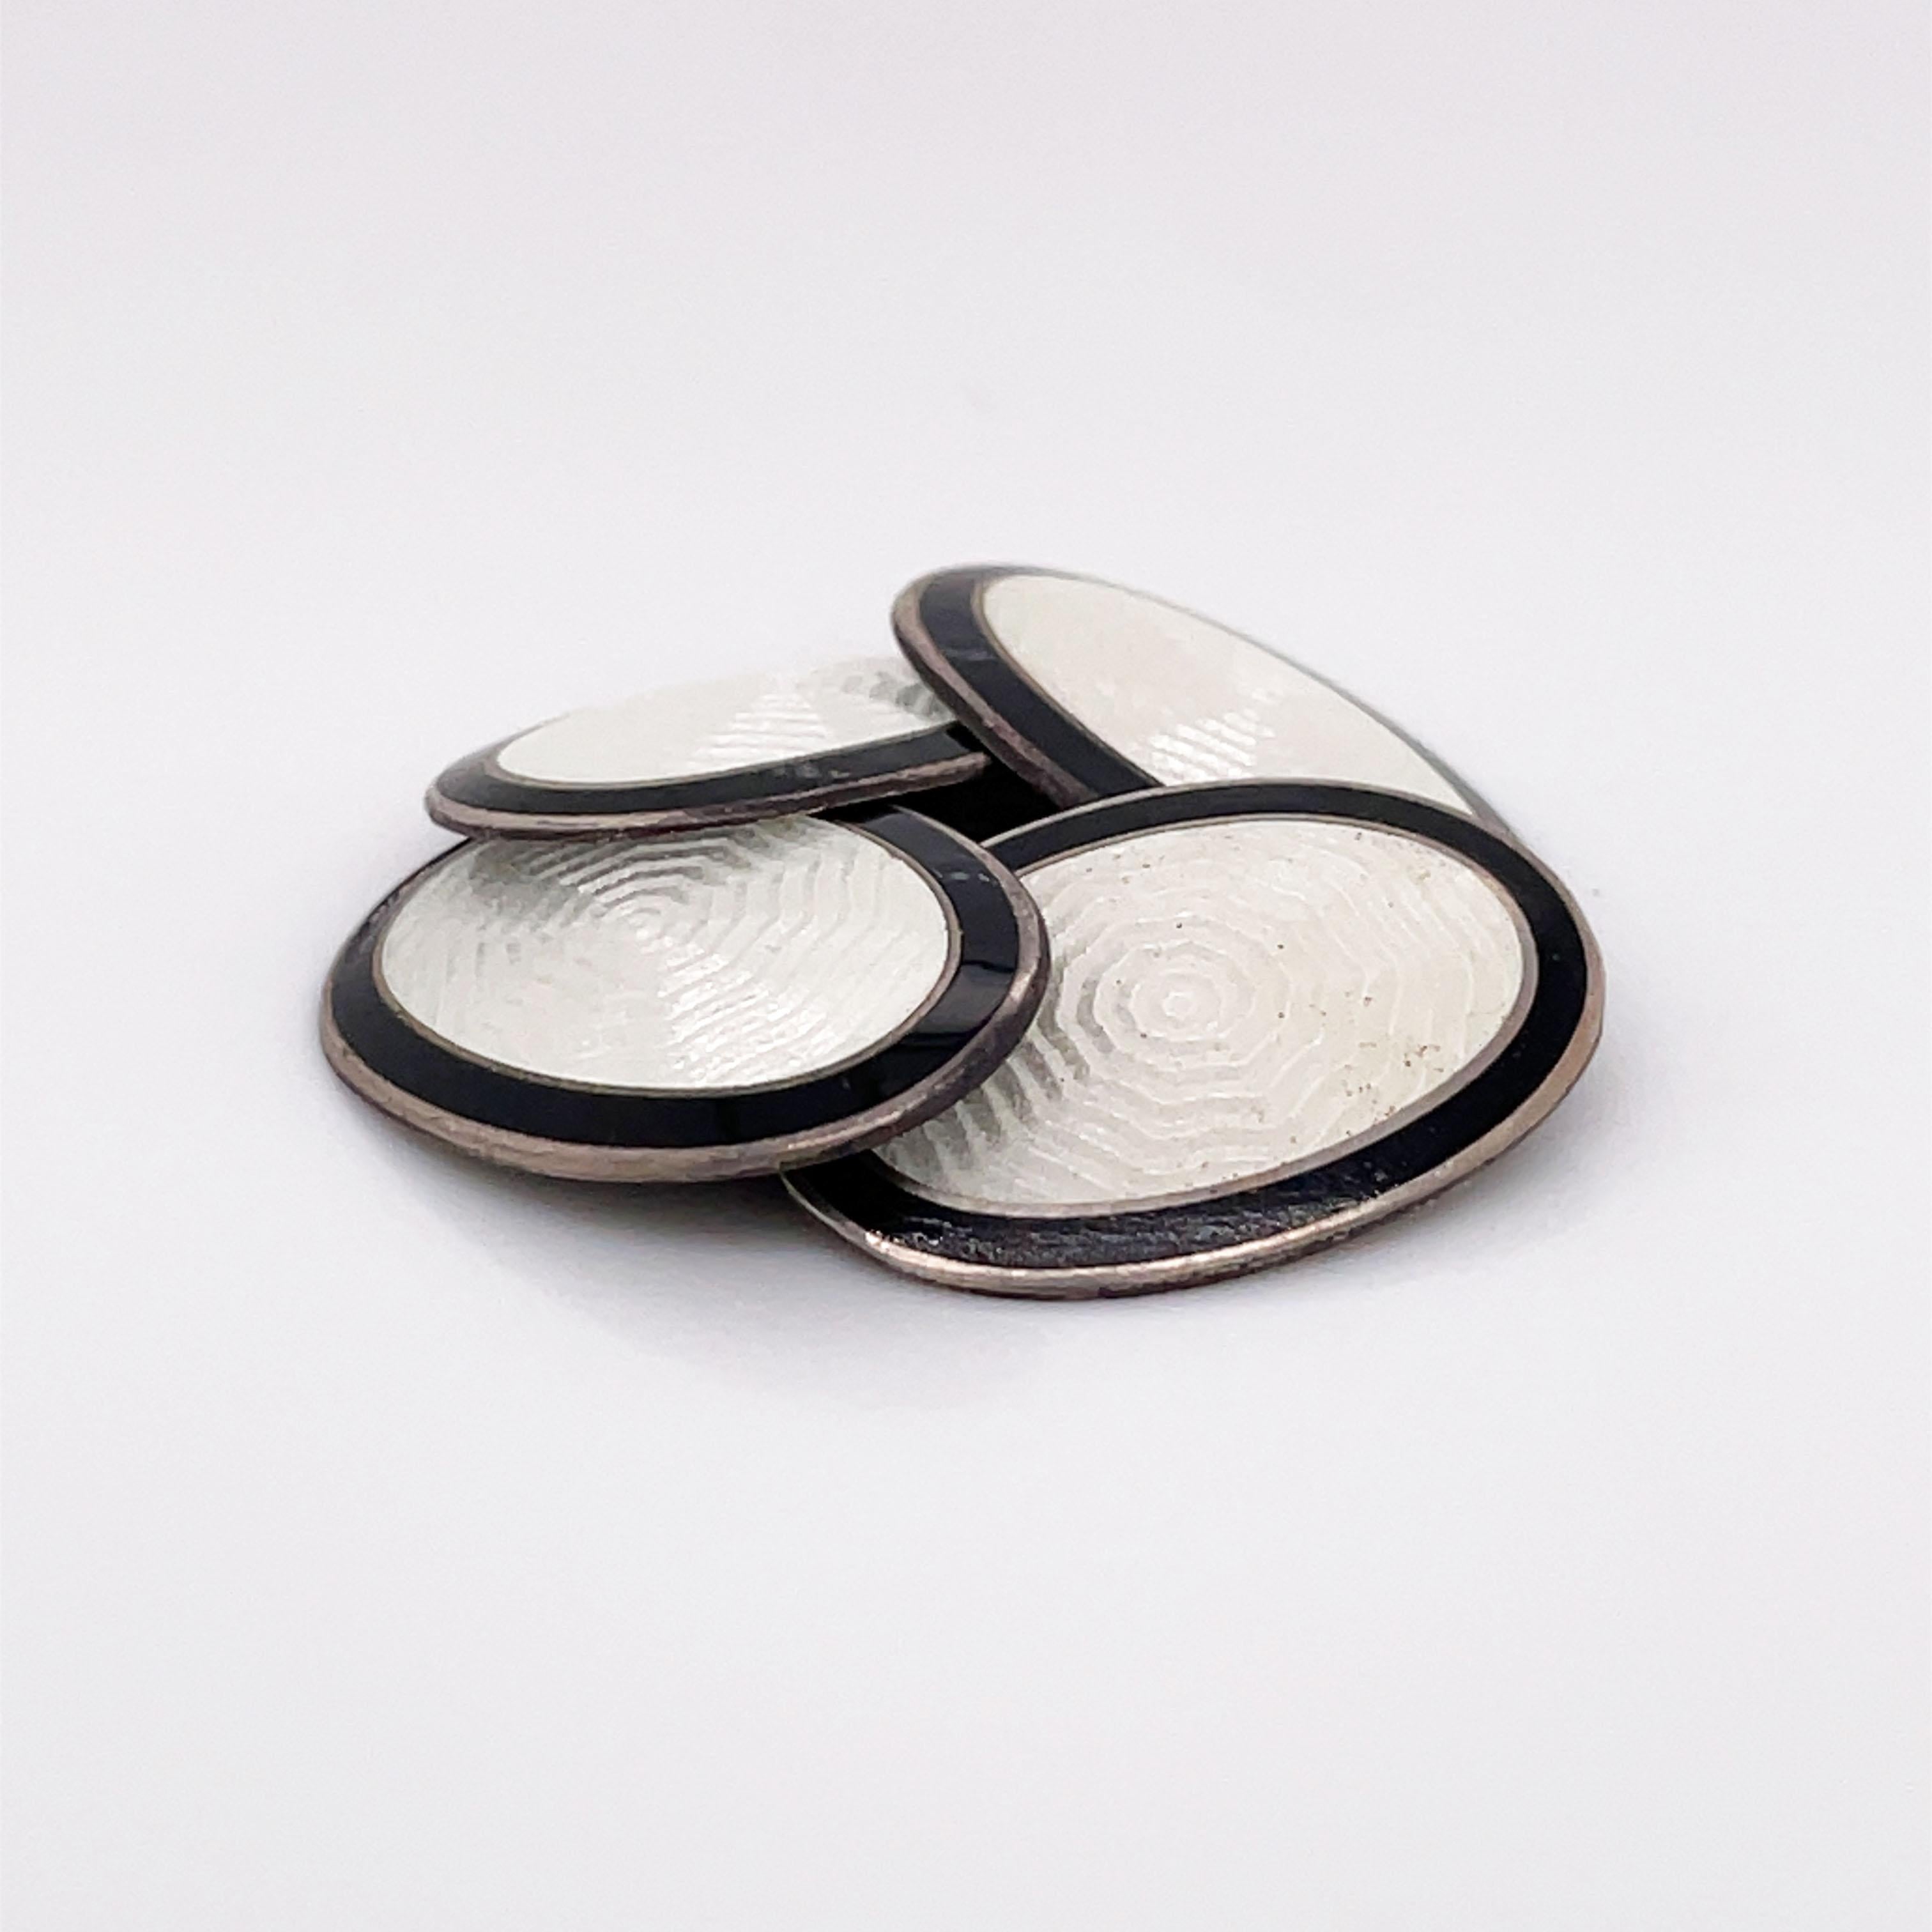 This is a beautiful pair of 1925 Art Deco Black & White Enamel Cufflinks! This is the perfect set of links for any established gentleman! Composed of Sterling Silver, this pair of cufflinks features a beautiful guilloche design, almost reminiscent